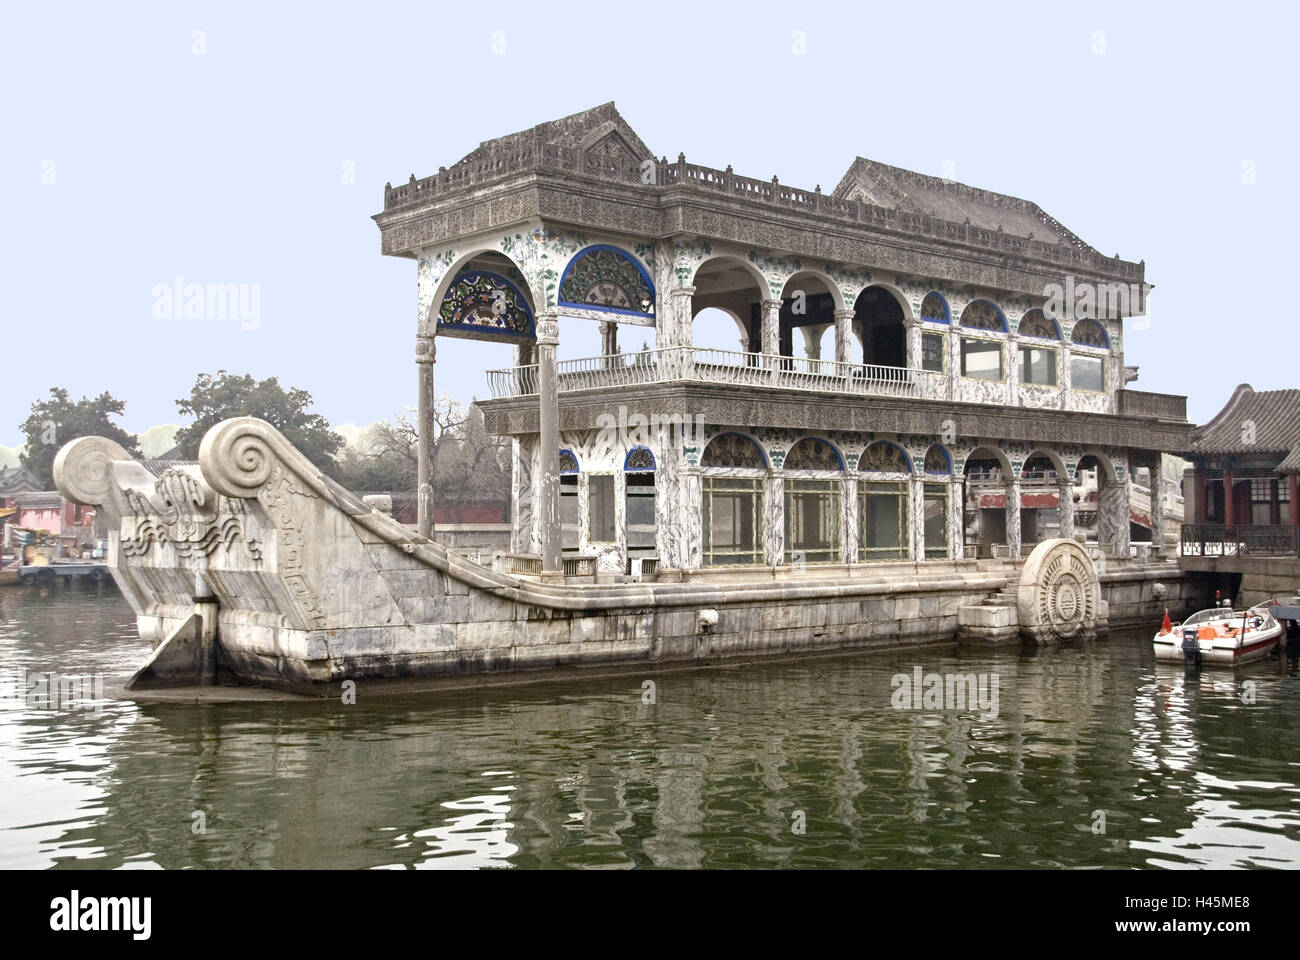 China, Peking, new summer palace, Yiheyuan, Kunming lake, marble boat, Asia, culture, art, town, capital, palace, garden palace, palace complex, waters, lake, pavilion, structure, stone boat, marble, boat, boot-shaped, place of interest, tourism, Stock Photo